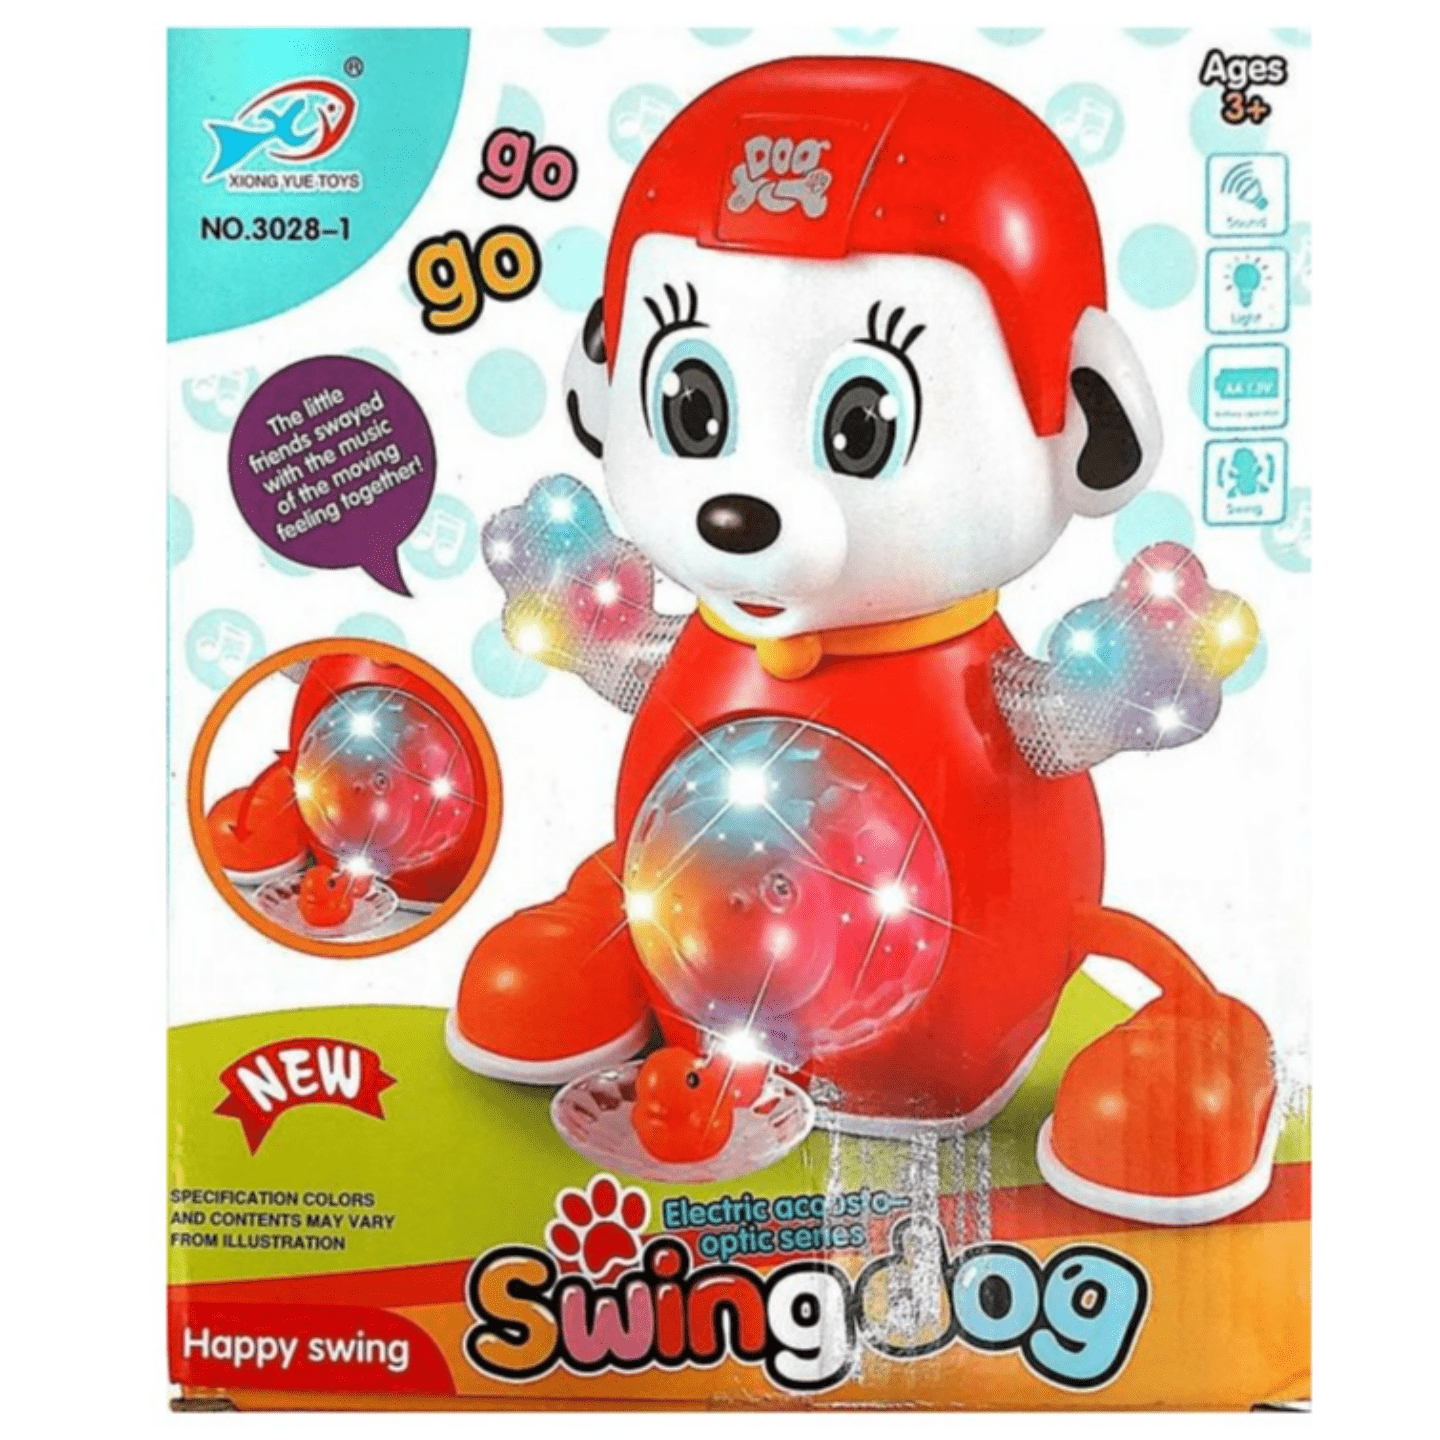 Happy Swing Bump and Go Musical Swinging Dog with LED lights